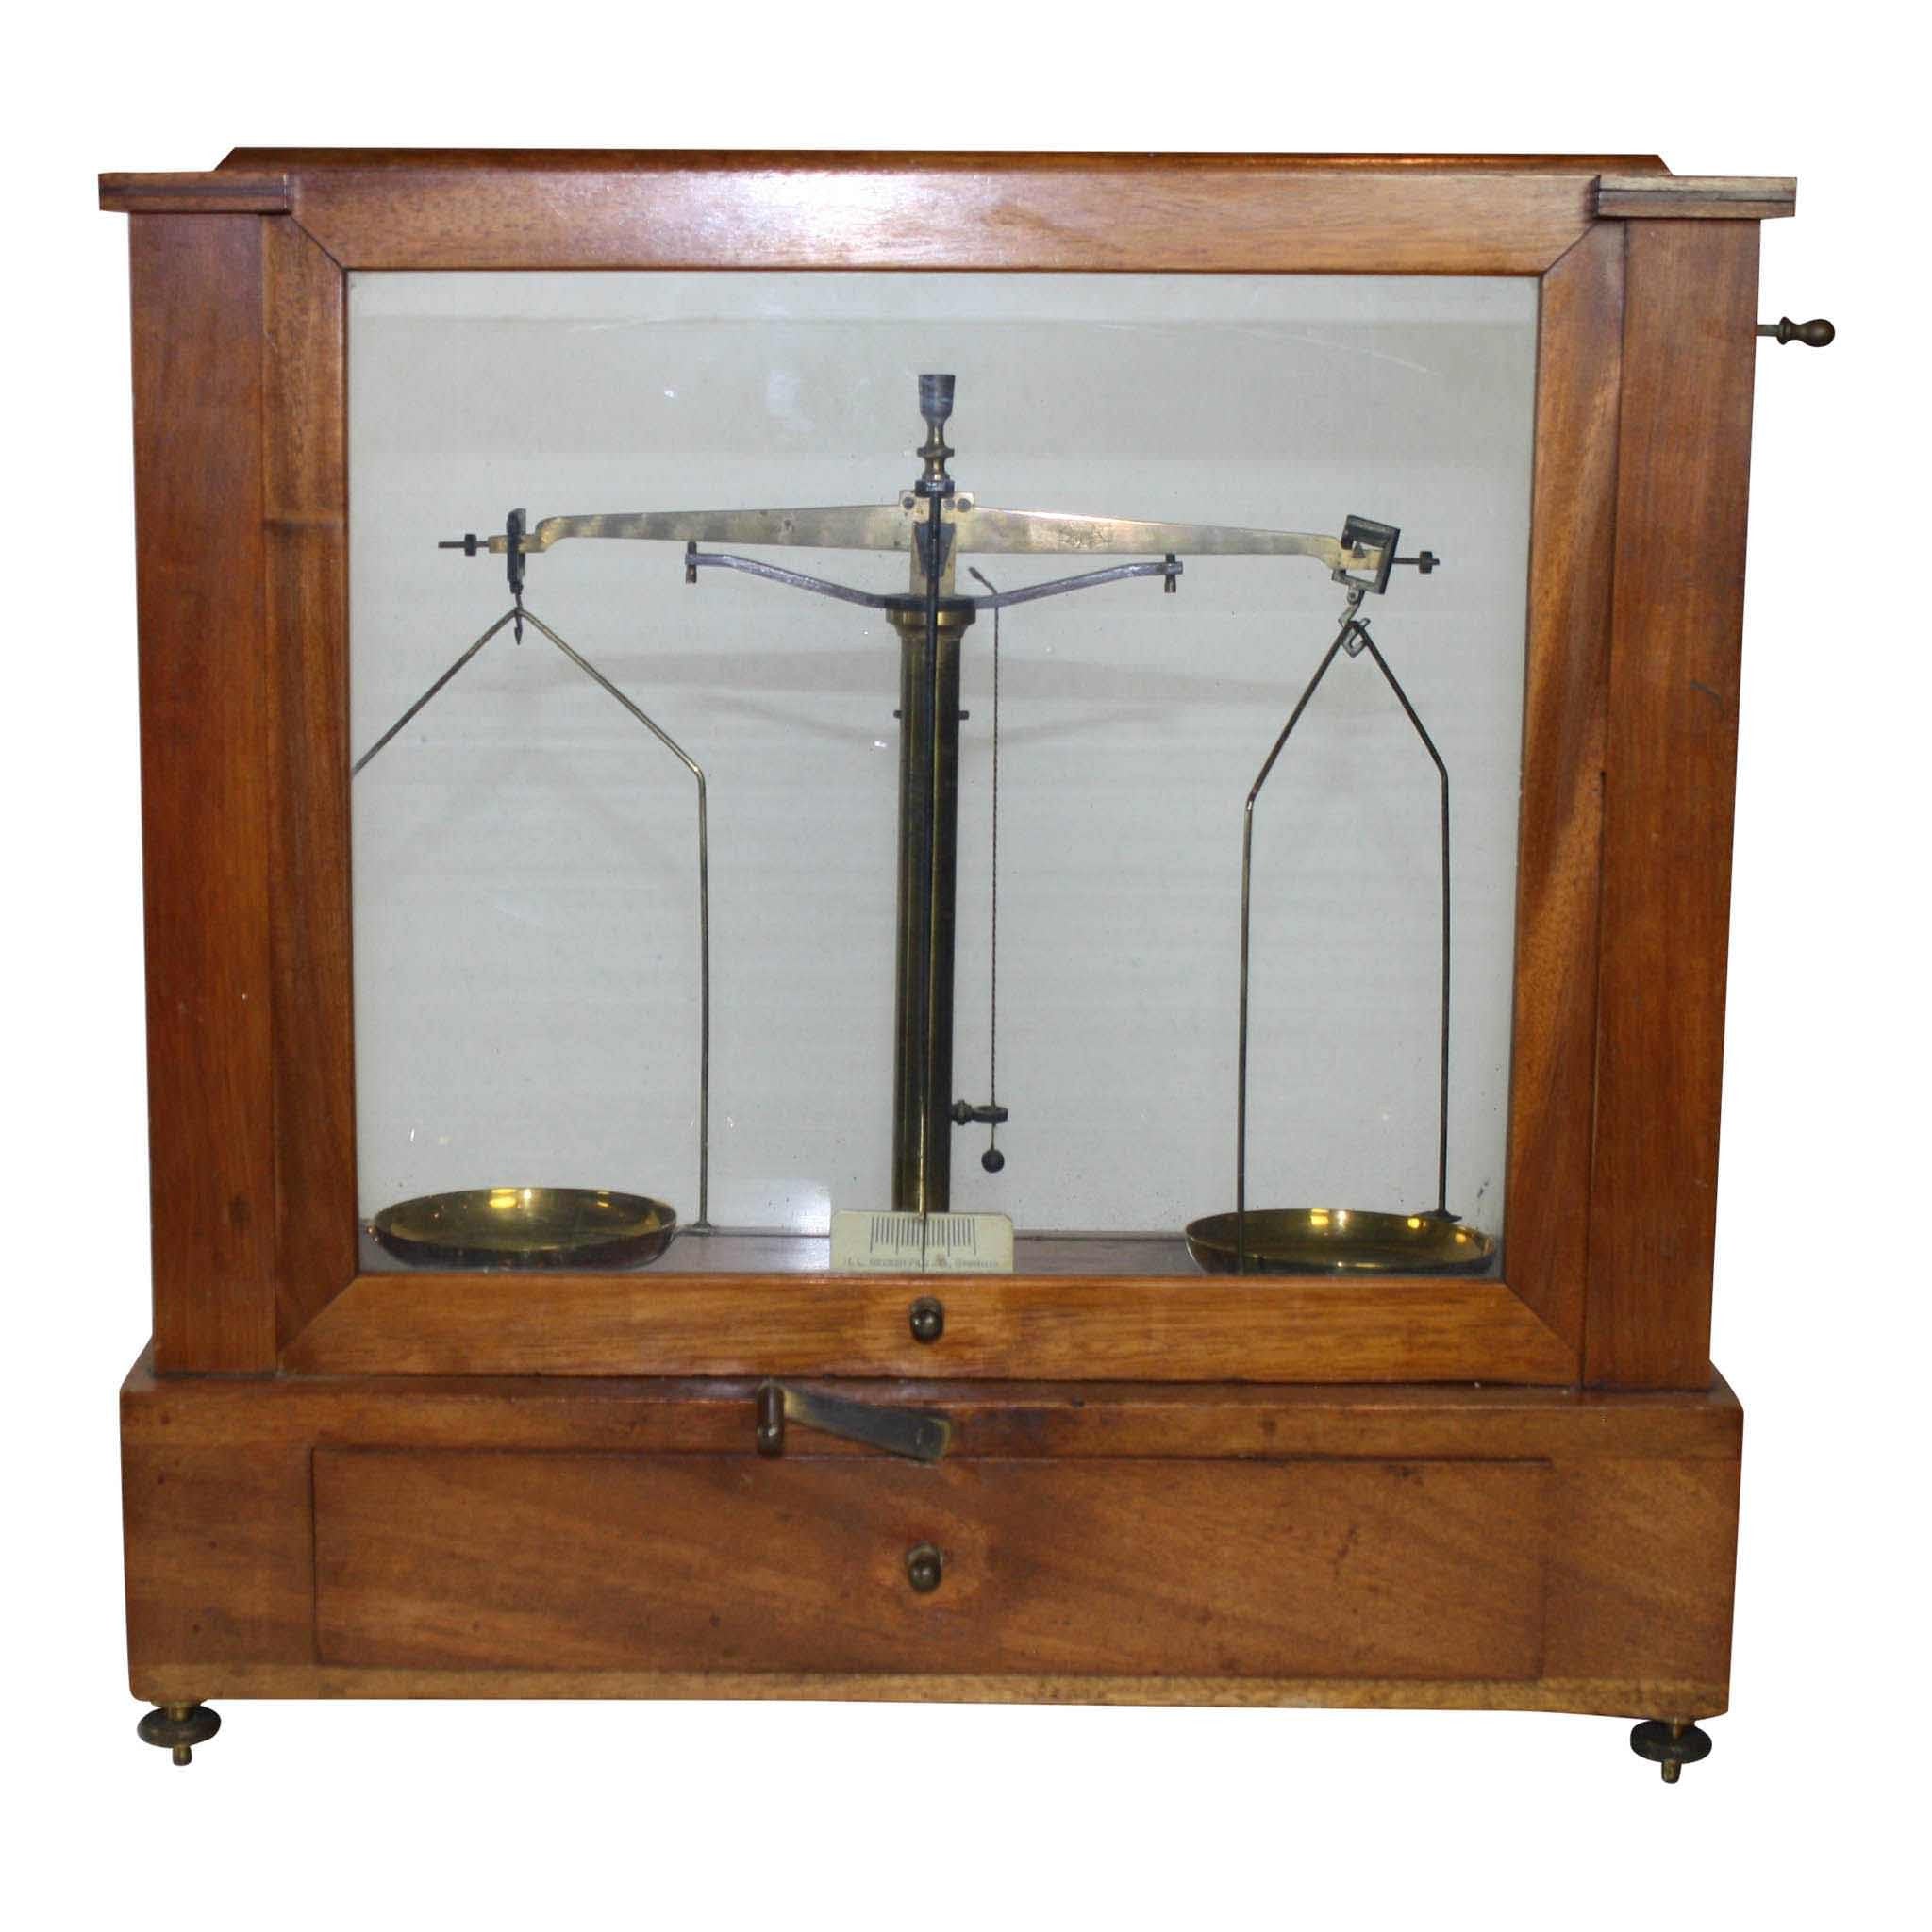 Pharmaceutical/Apothecary Scale in Glass Box with Weights